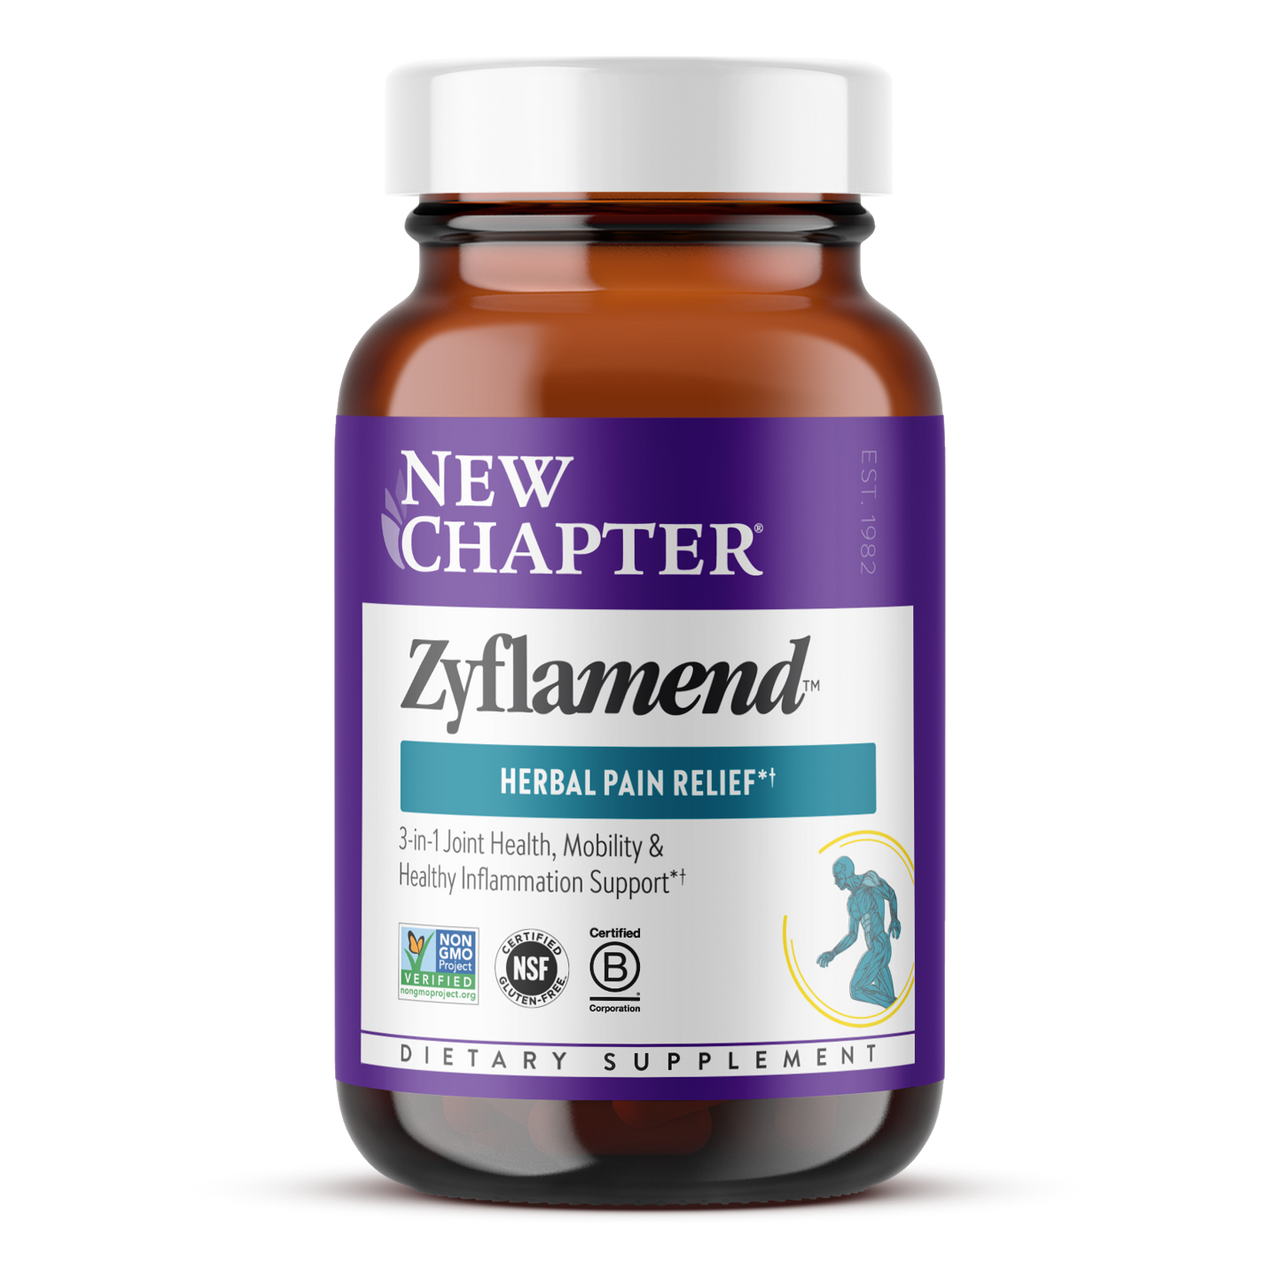 Zyflamend™: Herbal Pain Relief† & Inflammation Support†